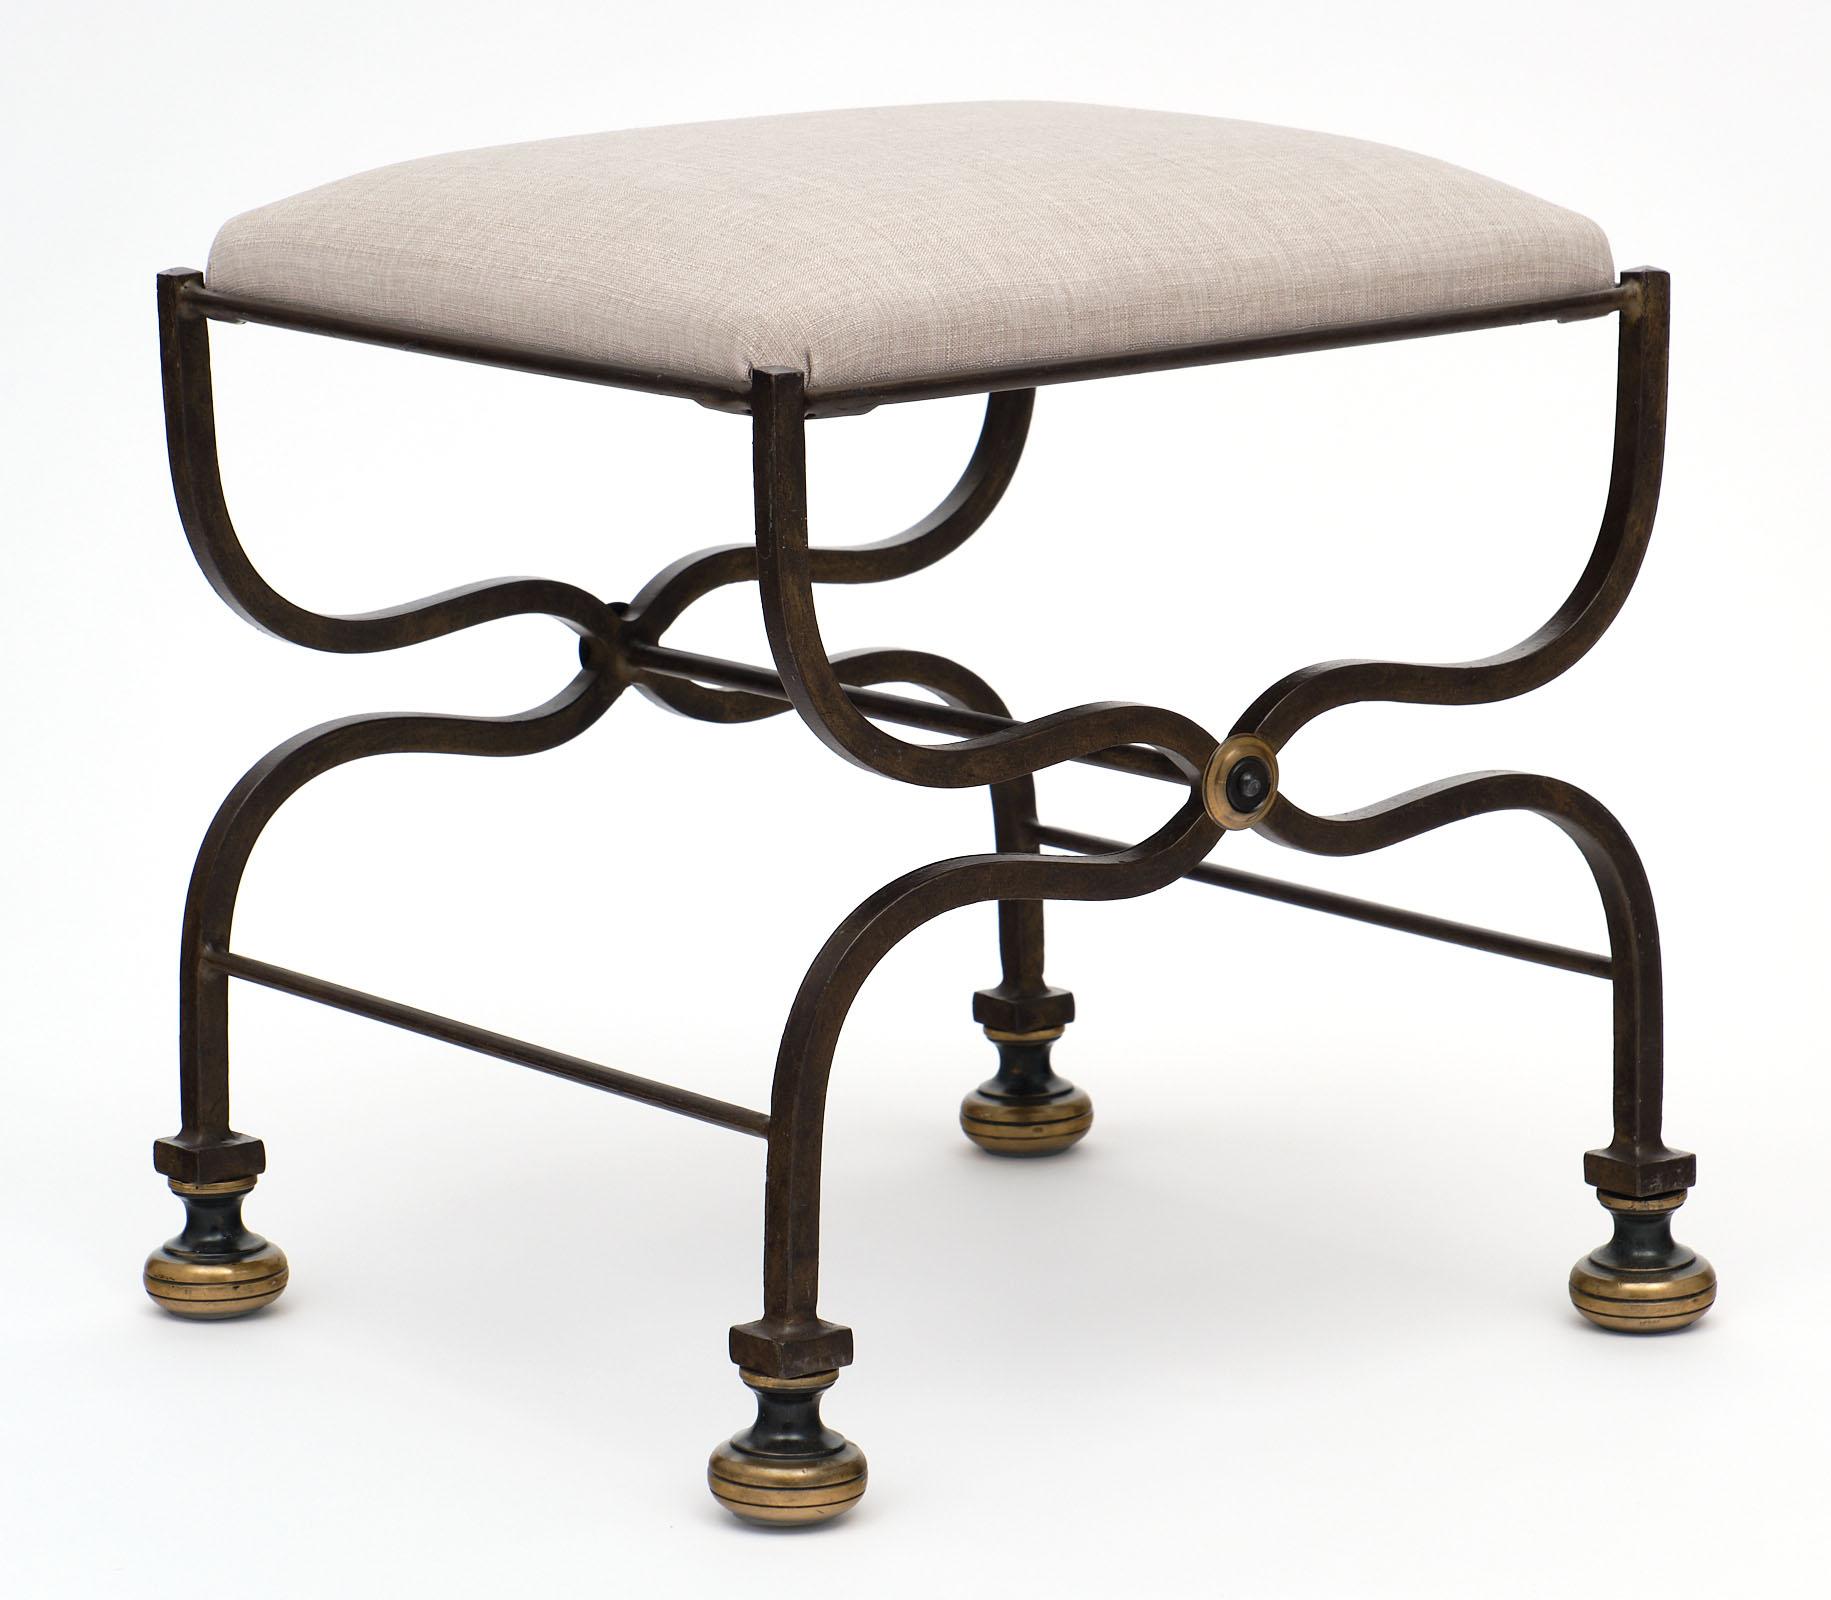 French antique forged iron bench with a strong design. This hand-hammered piece has bronze bun feet and detailing. The top cushion has been newly upholstered. There is a pair of matching chairs as well.